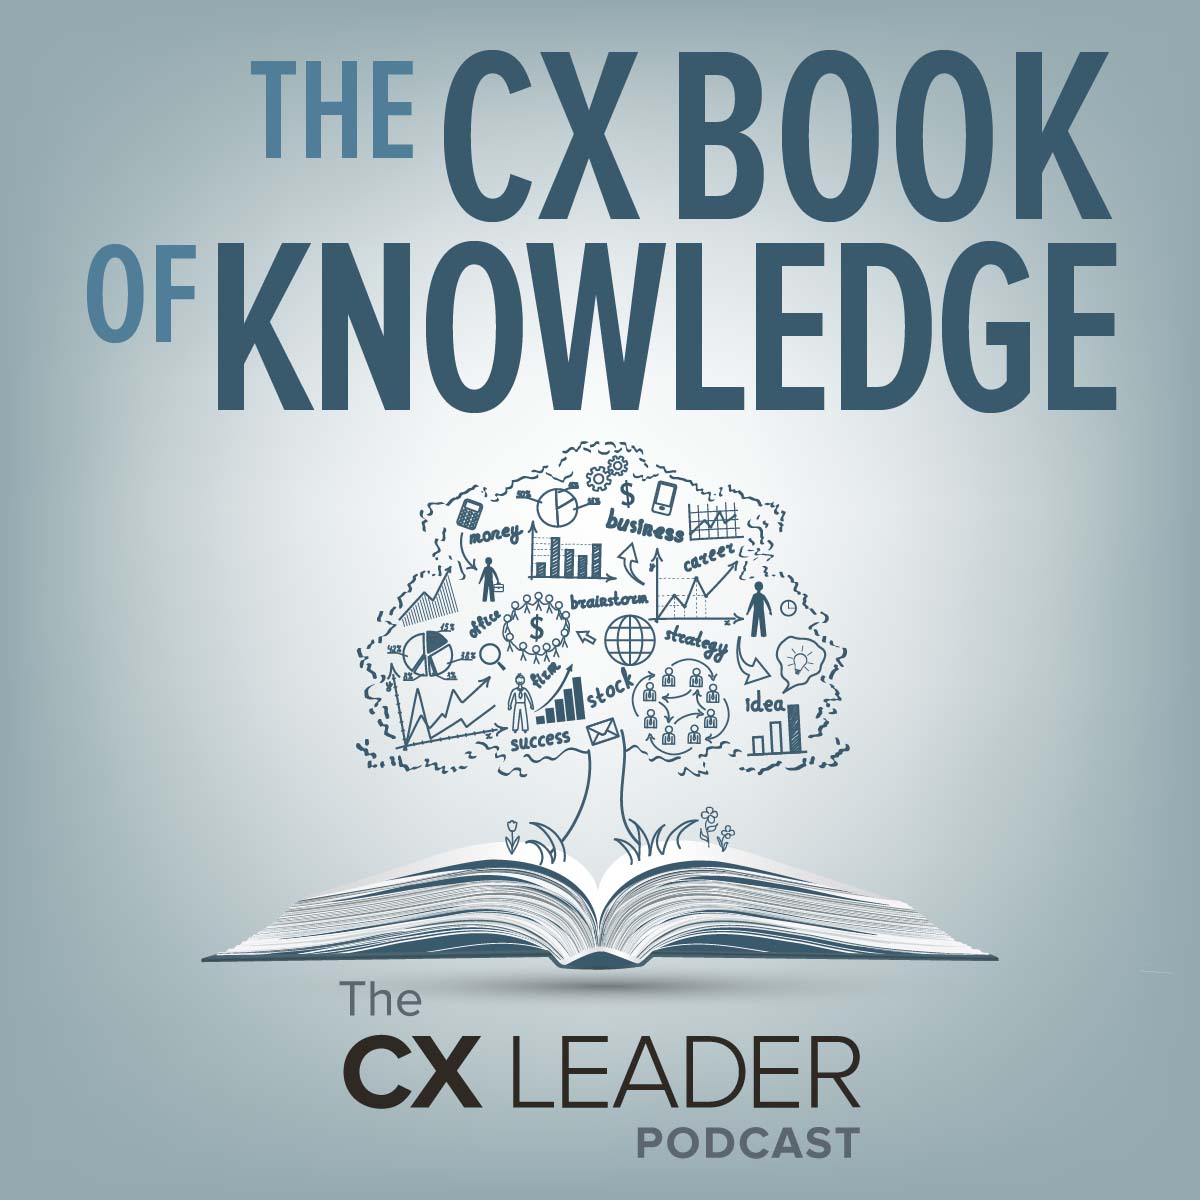 The CX Book of Knowledge